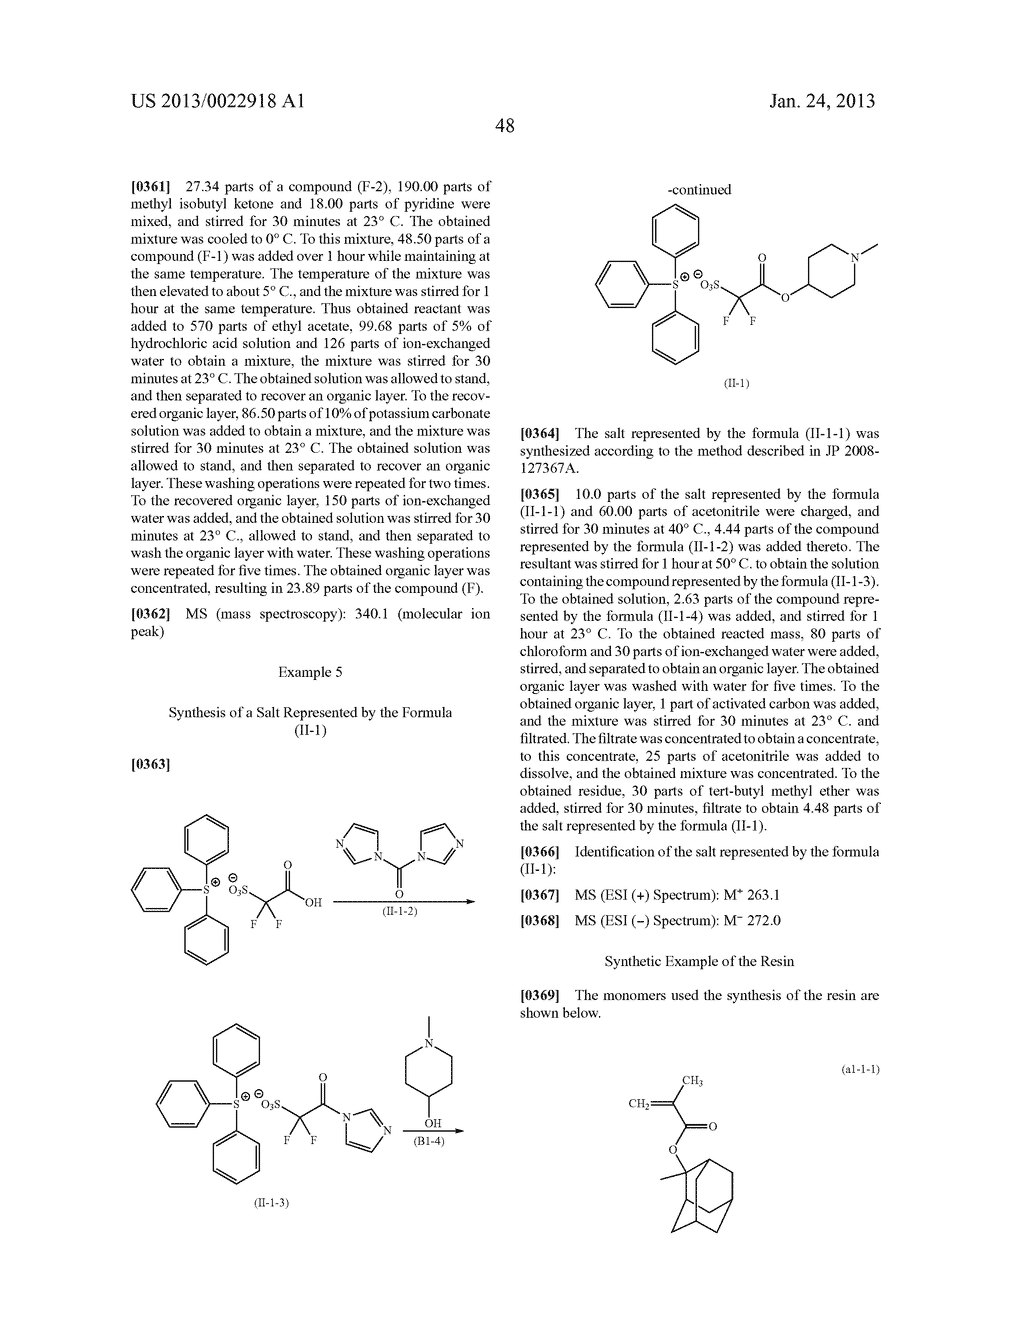 RESIST COMPOSITION AND METHOD FOR PRODUCING RESIST PATTERN - diagram, schematic, and image 49